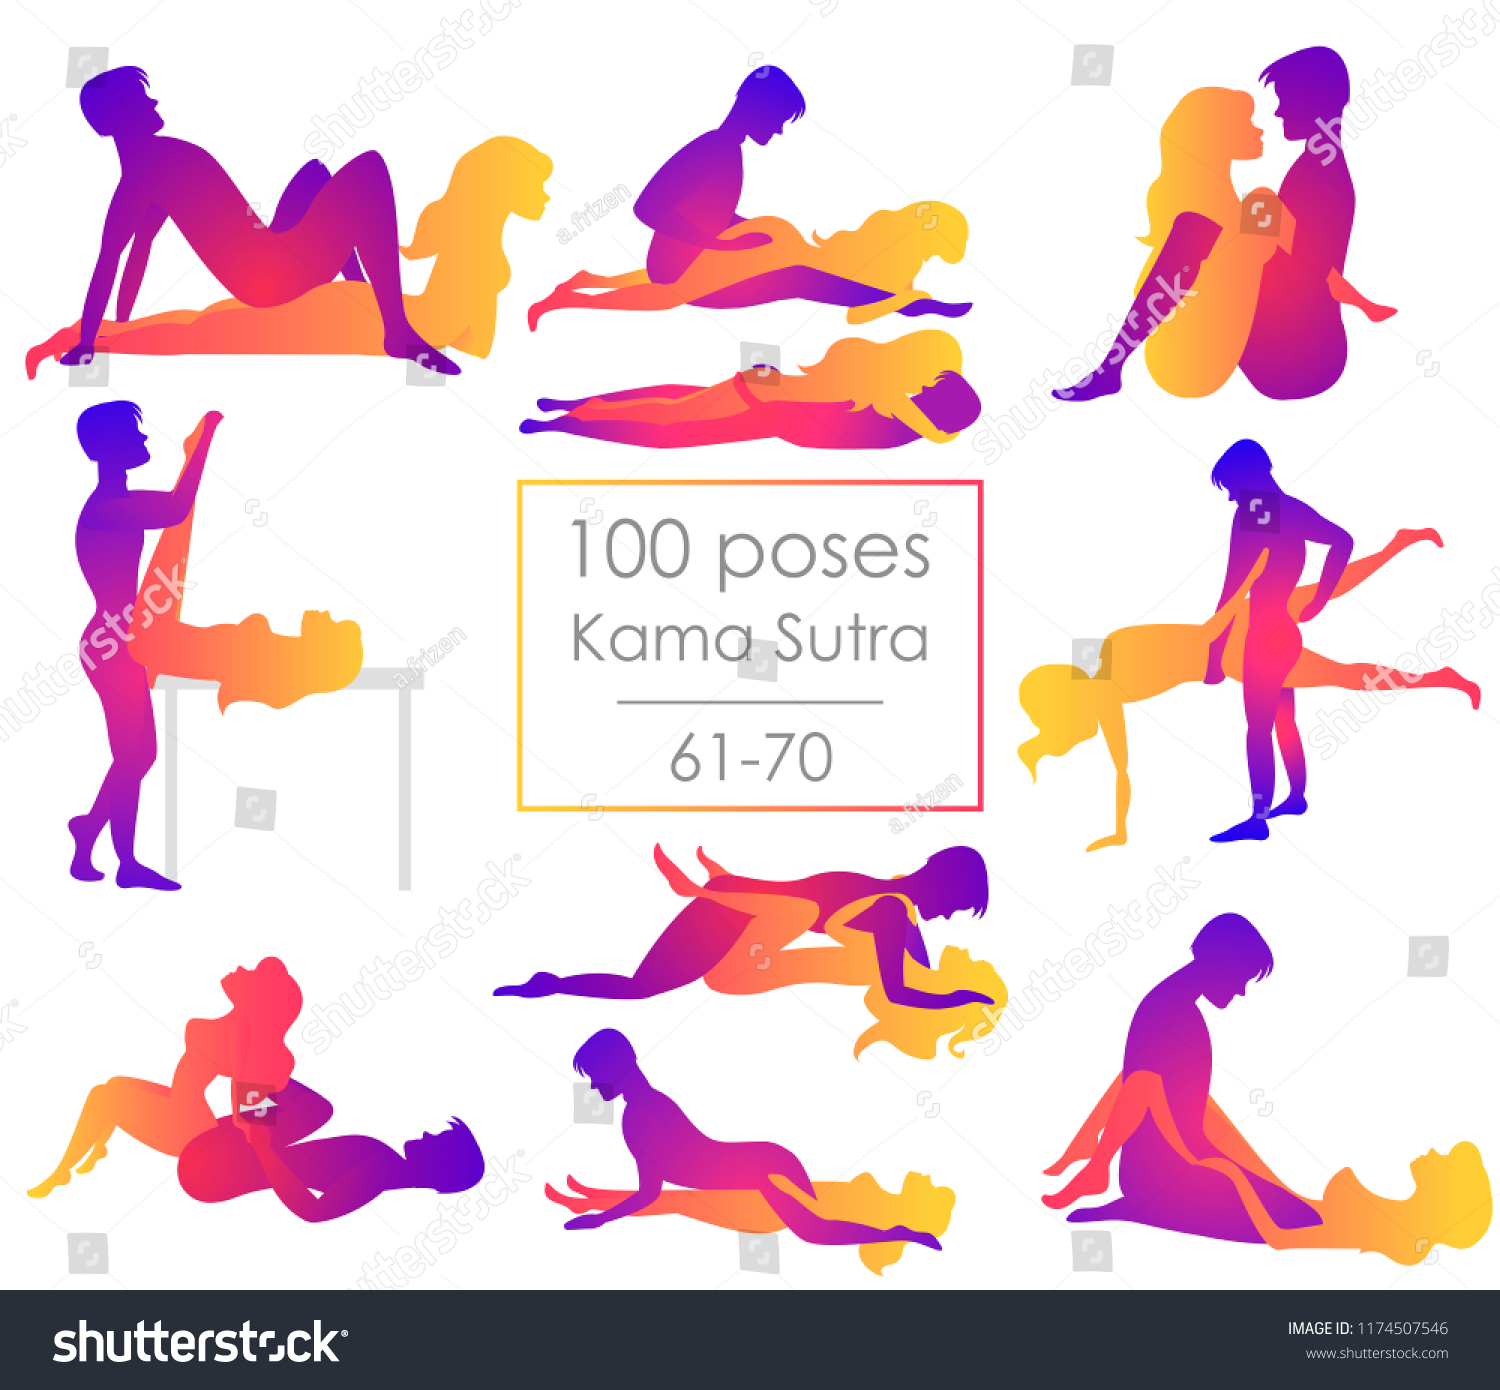 Positions of kama sutra